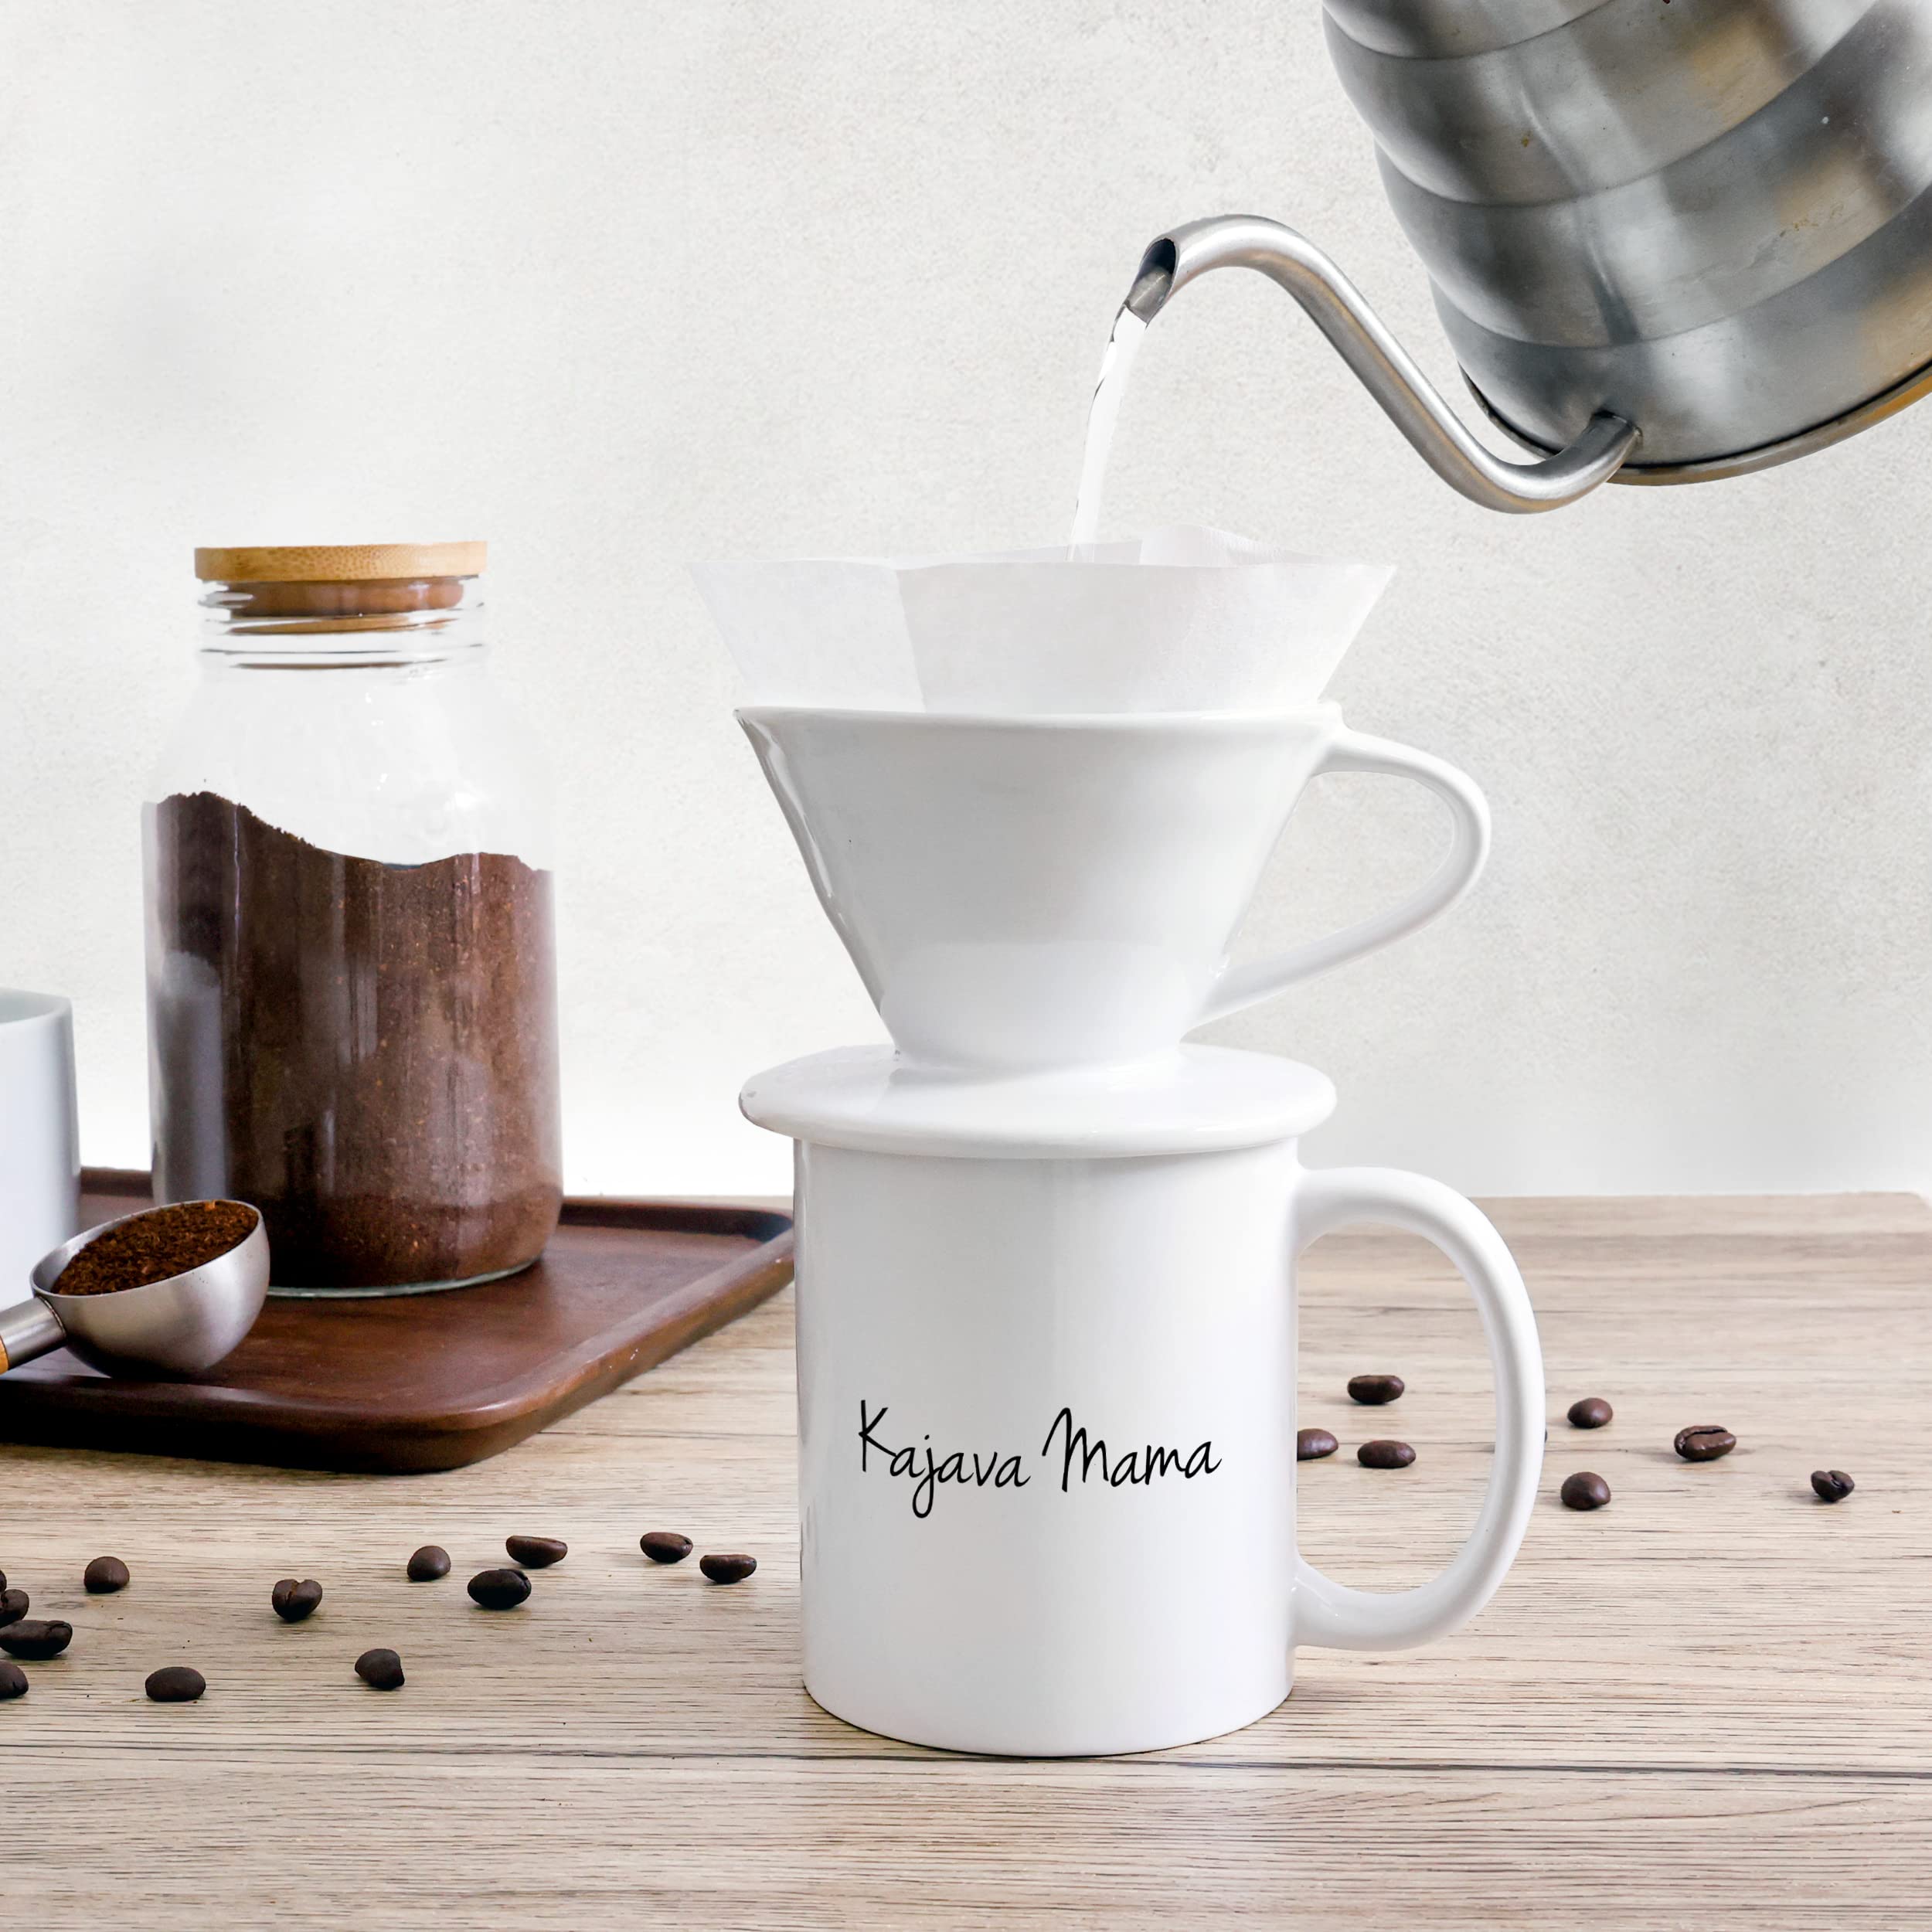 Kajava Mama Pour Over Coffee Dripper - Ceramic Slow Brewing Accessories for Home, Cafe, Restaurants - Easy Manual Brew Maker Gift - Strong Flavor Brewer - V02 Paper Cone Filters - Brown, 2 Cup size  - Like New